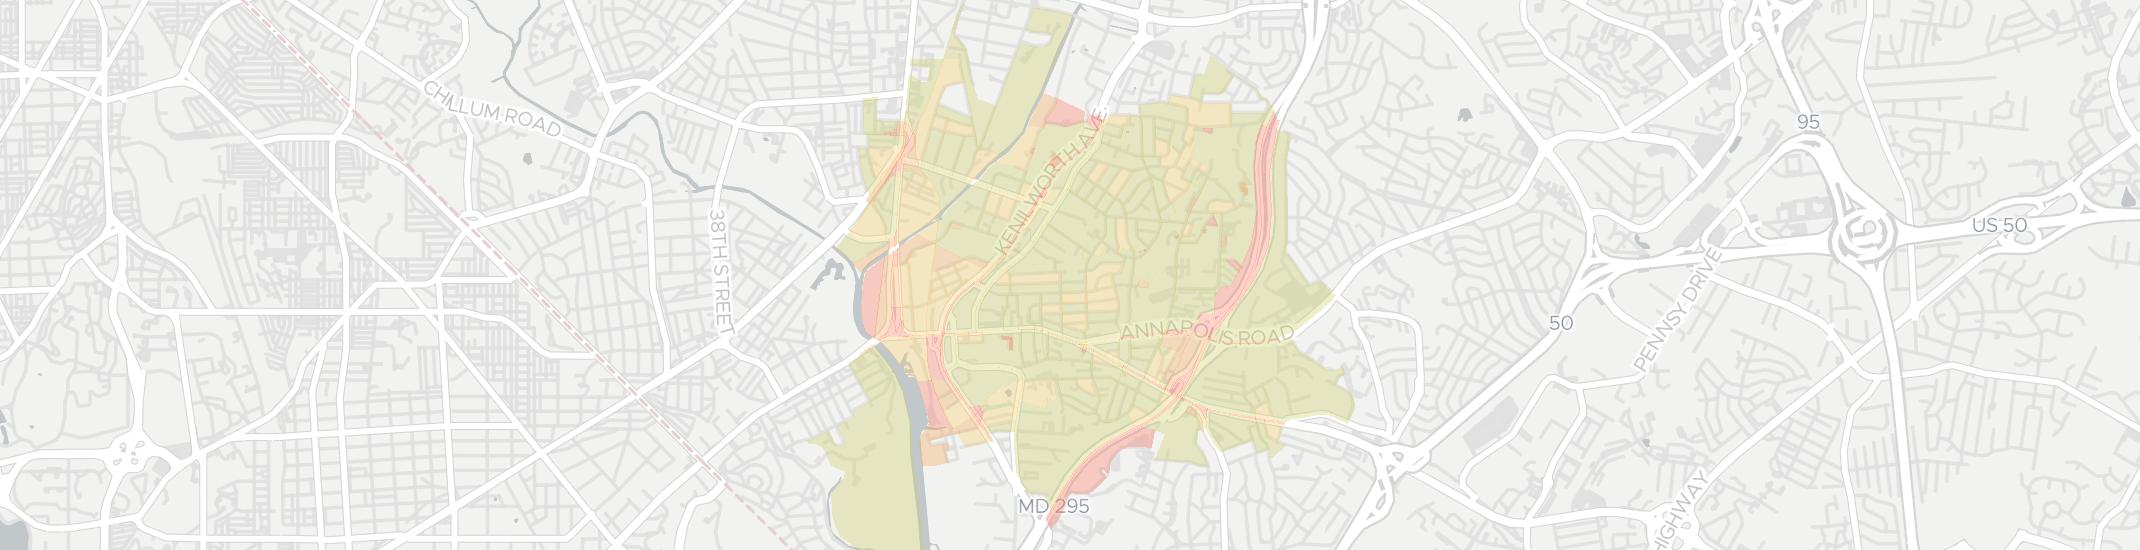 Bladensburg Internet Competition Map. Click for interactive map.